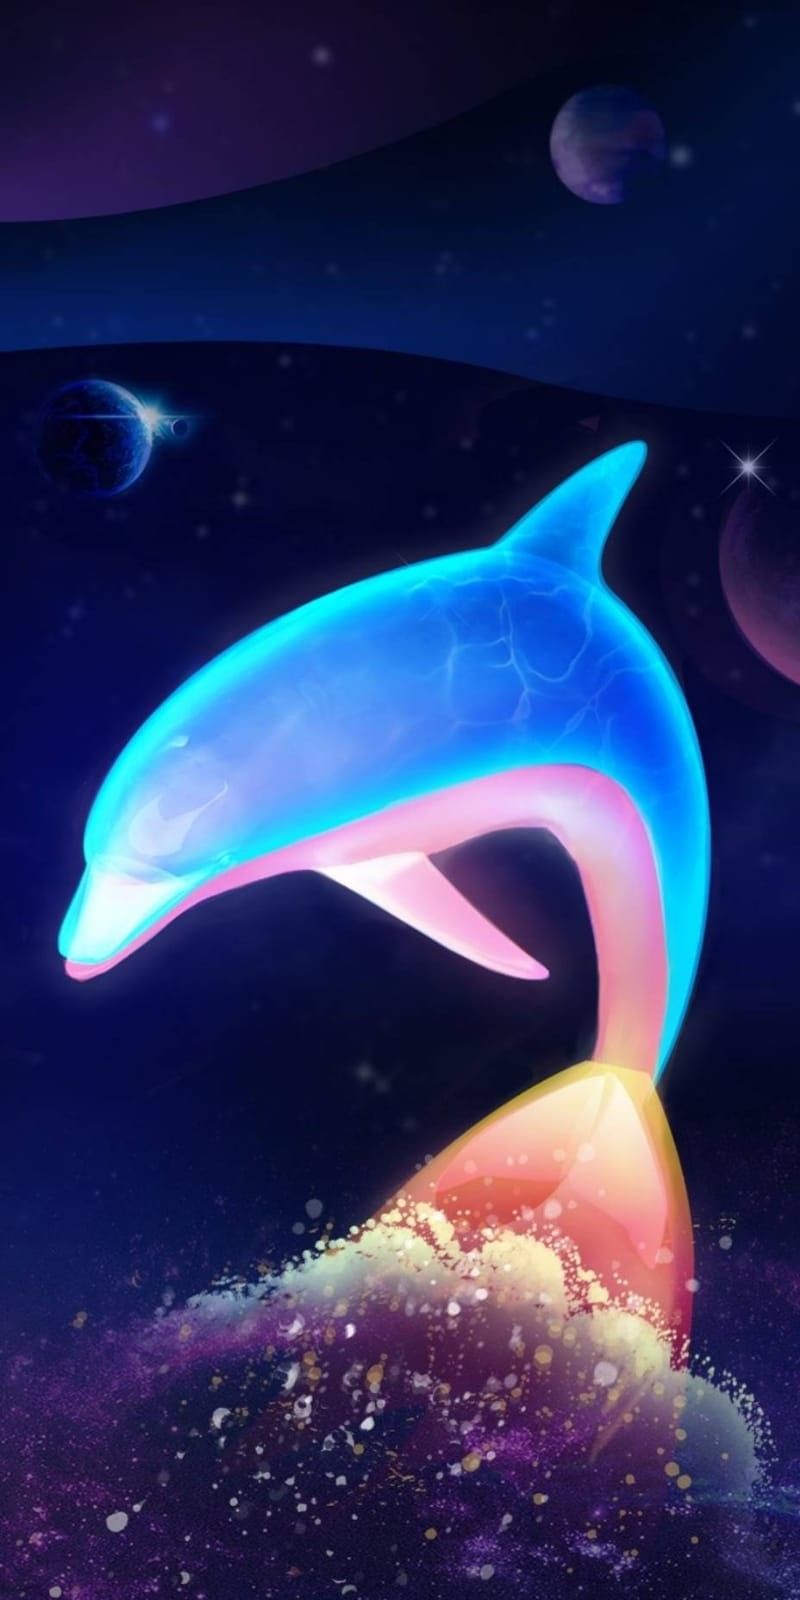 Dolphin Iphone Wallpapers